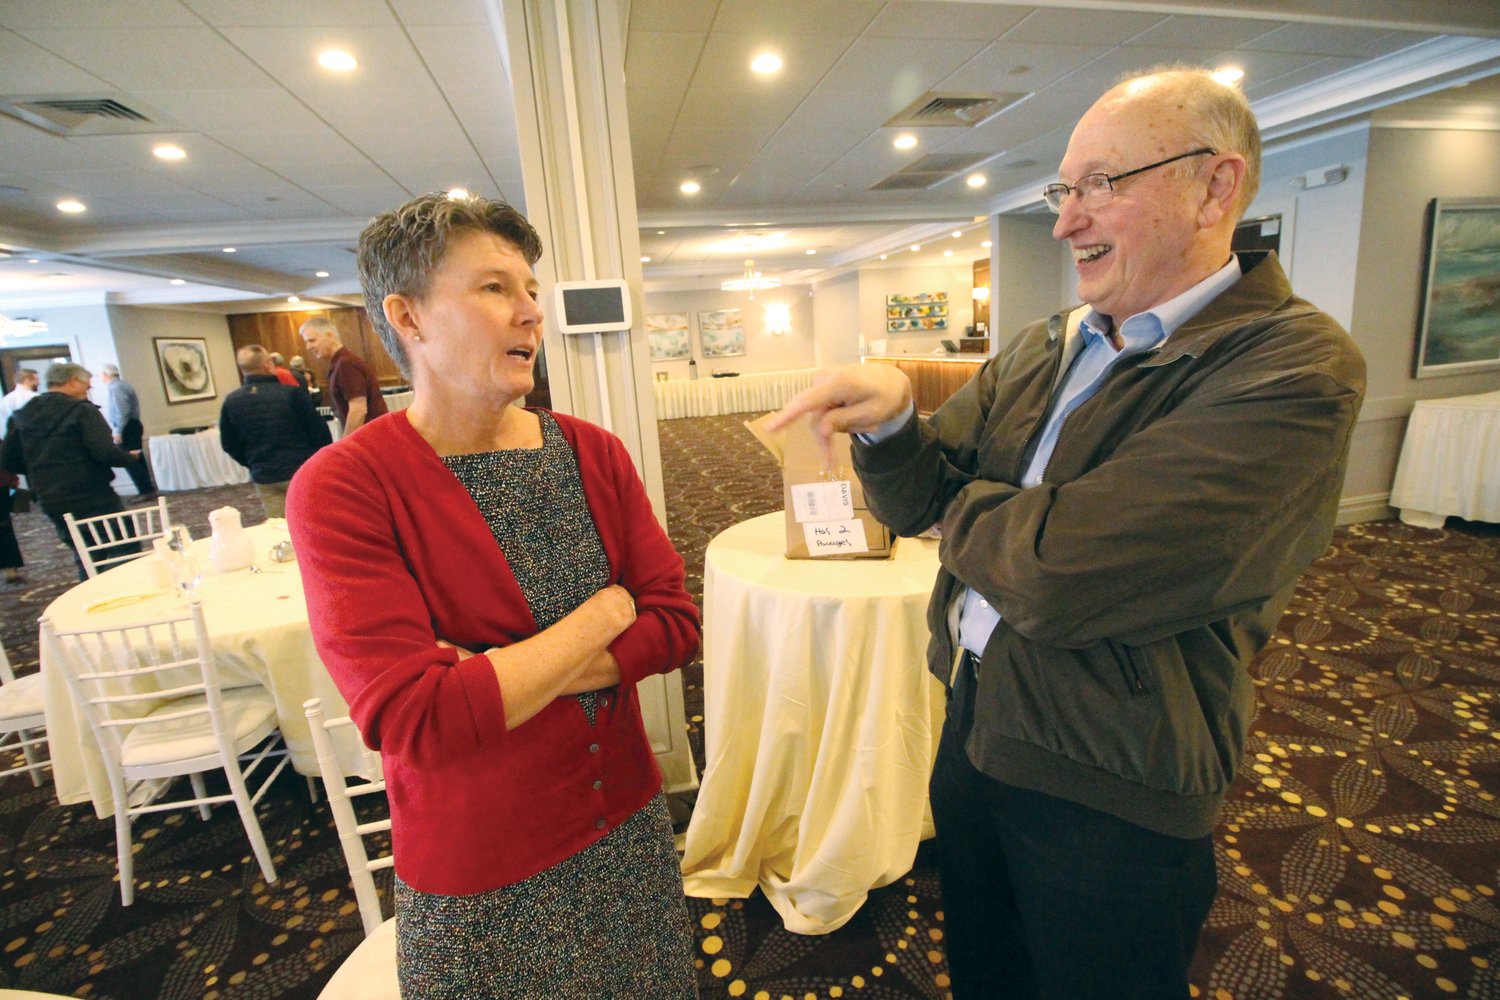 WHAT IT WAS LIKE: Judy Davis talks with Dennis Sleister, a member of the Warwick Rotary Club, following her talk describing her 3,804-mile trip across this country by bicycle.